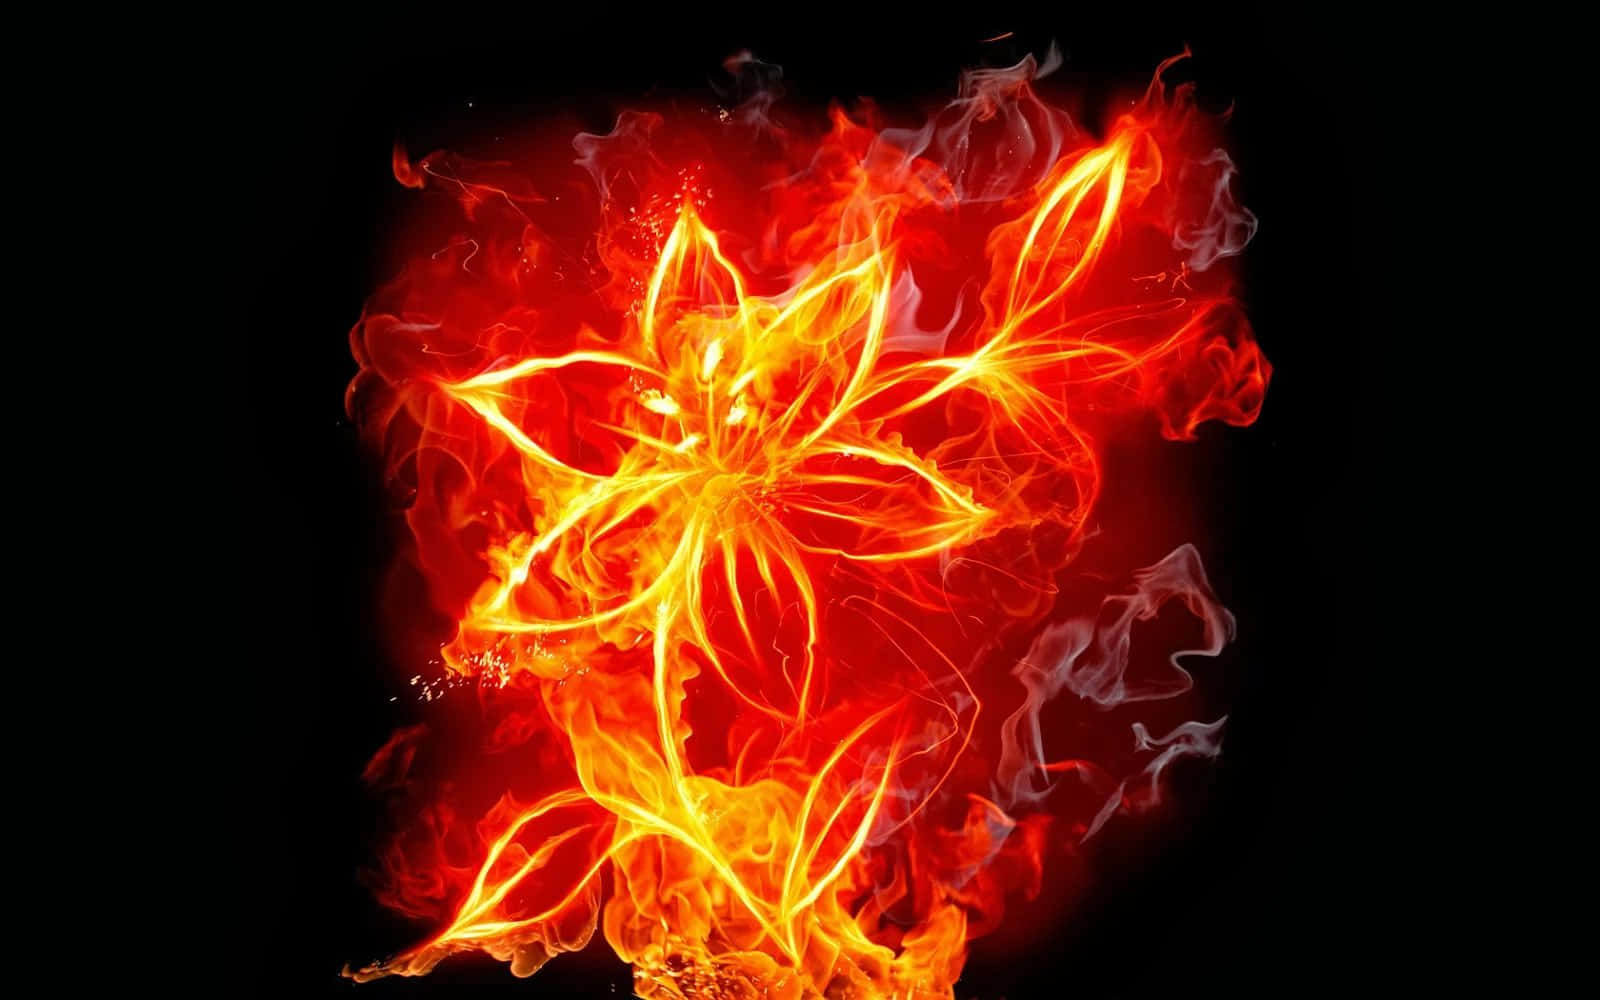 Coolefeuerblume Wallpaper